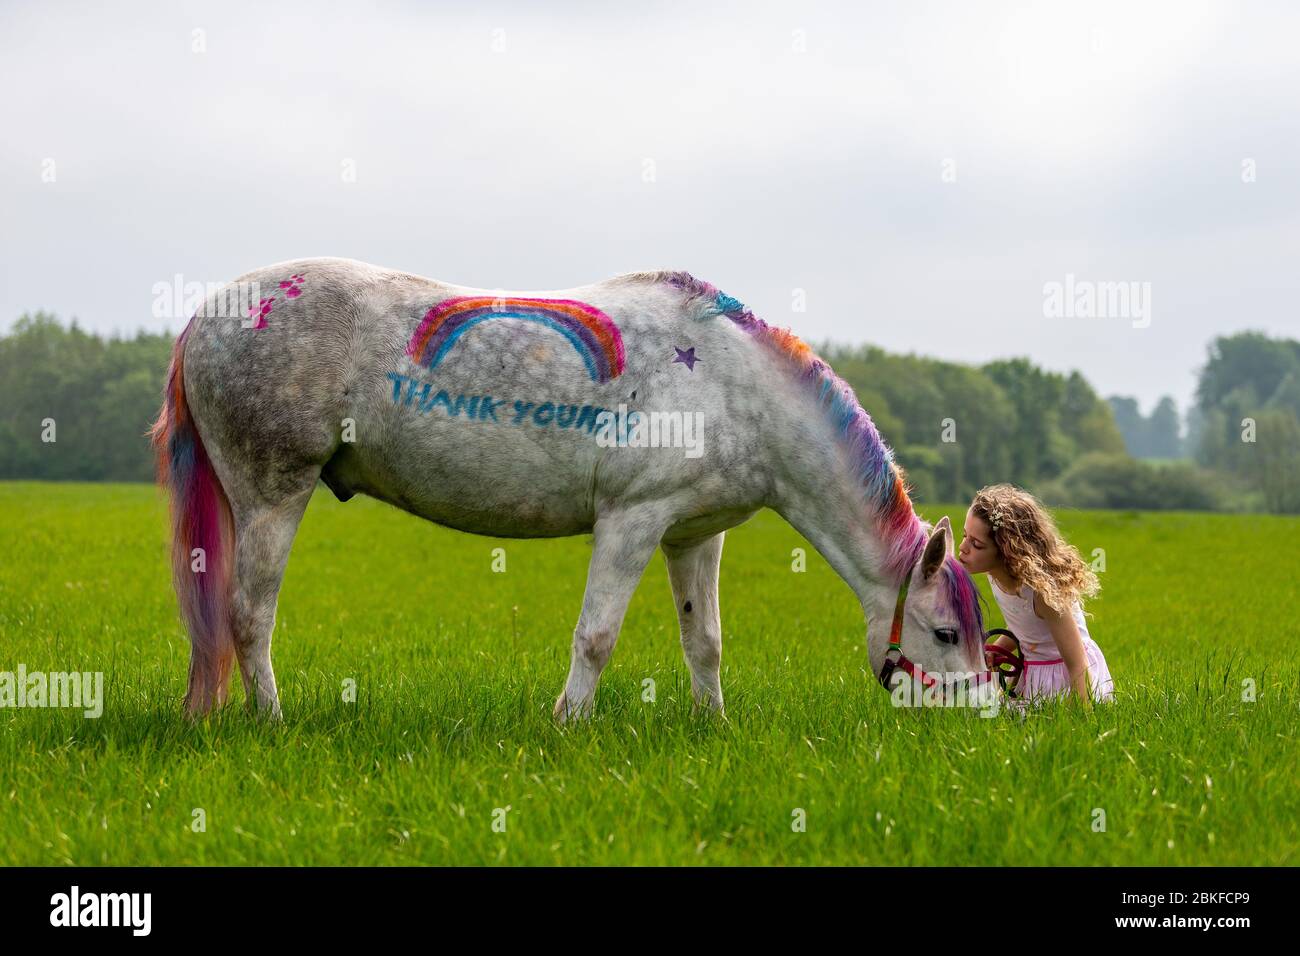 Bridgnorth, Shropshire, UK. 4th May, 2020. 8-year-old Amber Price, of Bridgnorth, with her New Forest Pony, Bear. Bear has been painted with a 'thank you' to the NHS using special pony paint. Credit: Peter Lopeman/Alamy Live News Stock Photo